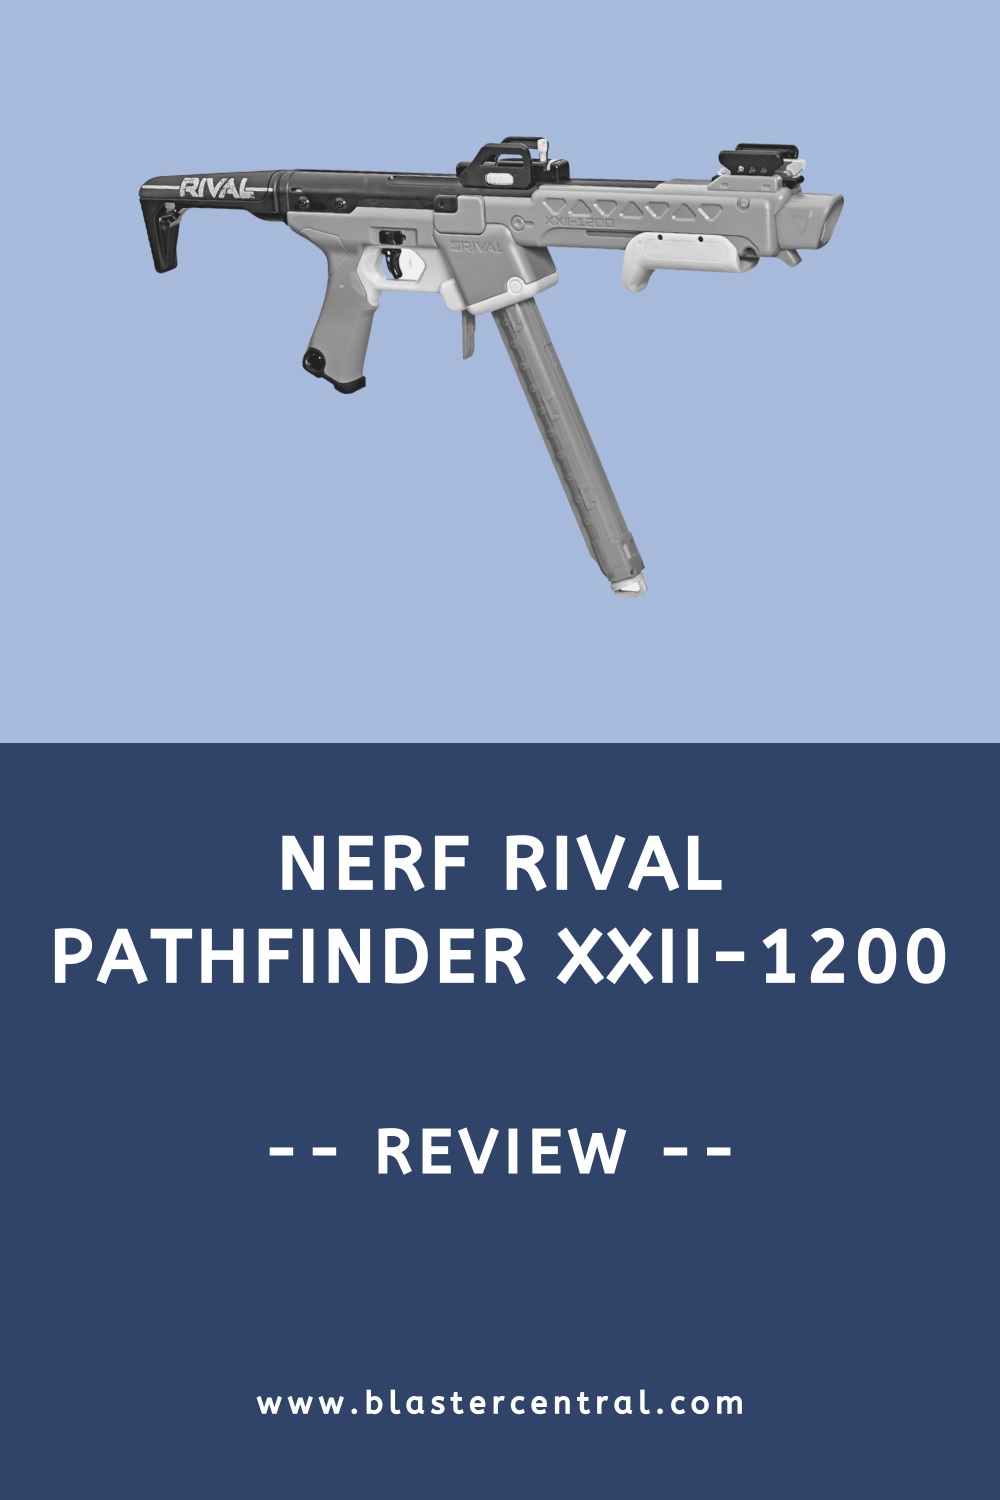 Review of the Nerf Rival Pathfinder XXII-1200